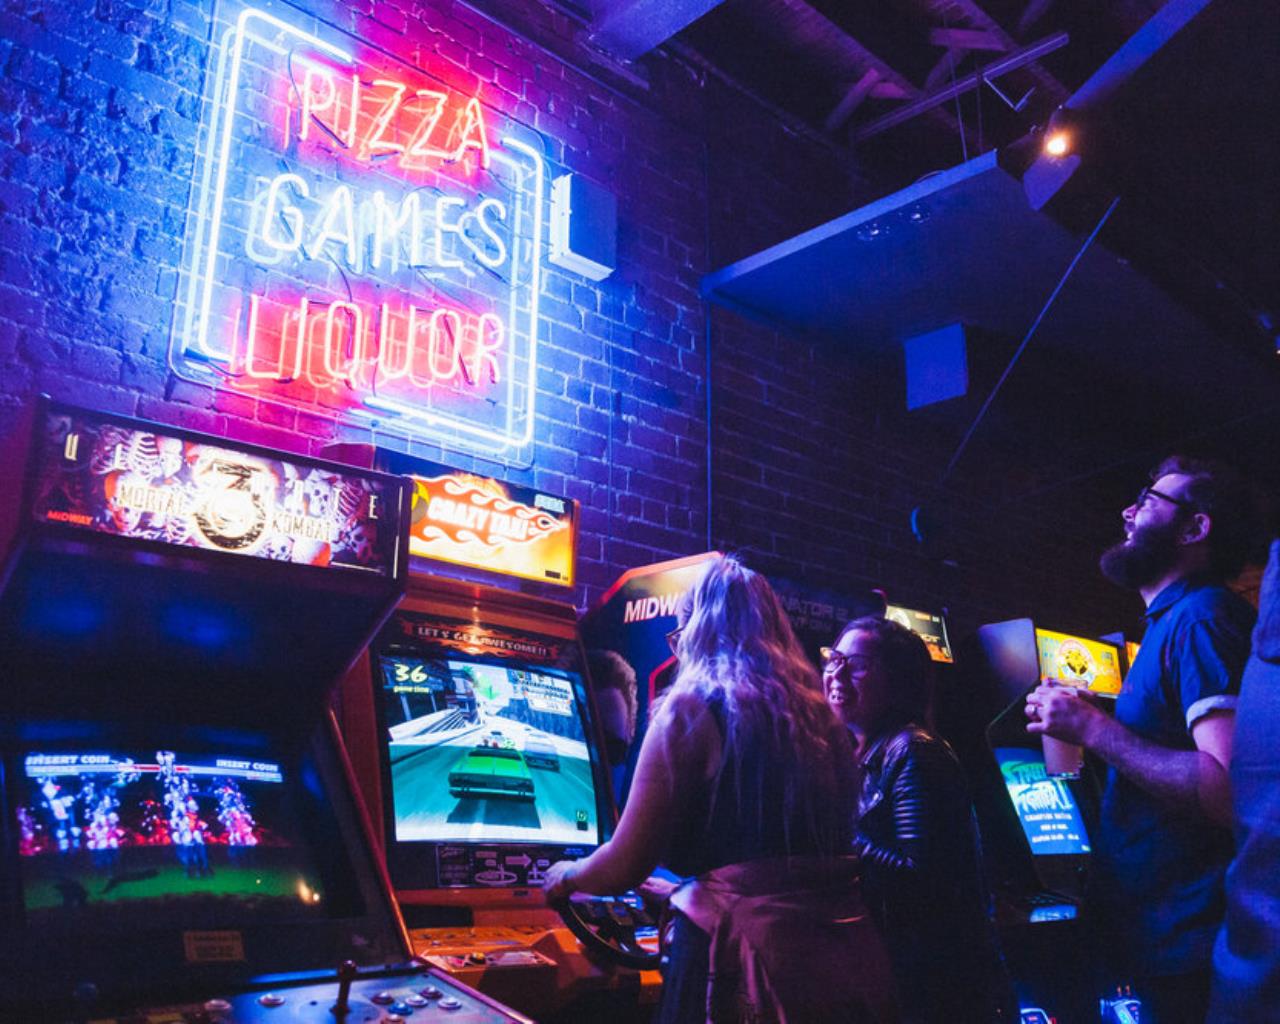 Game screens and neon signs